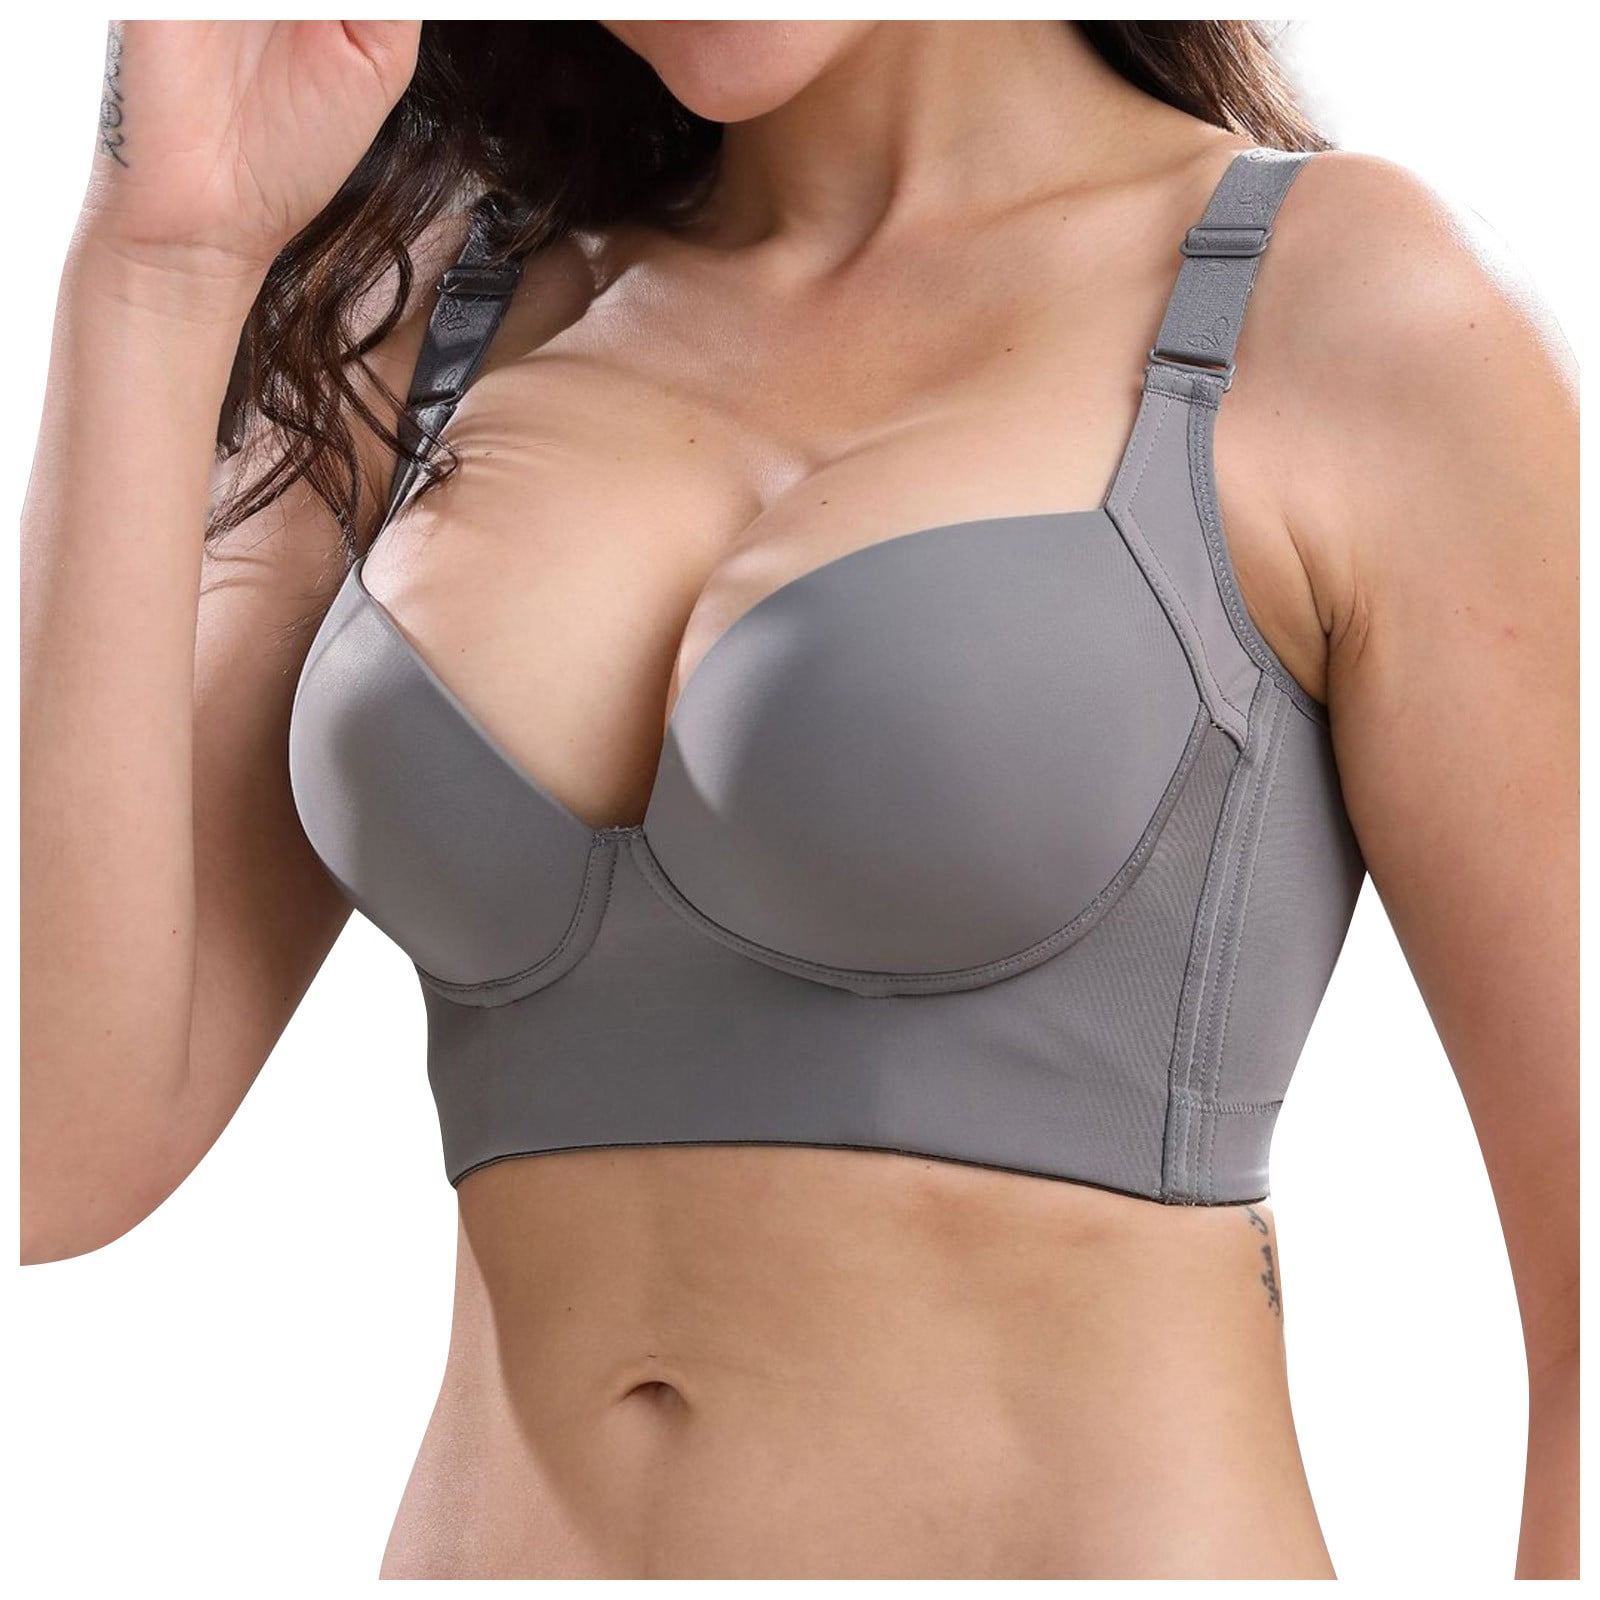 What is the main difference between a sports bra and a push-up bra